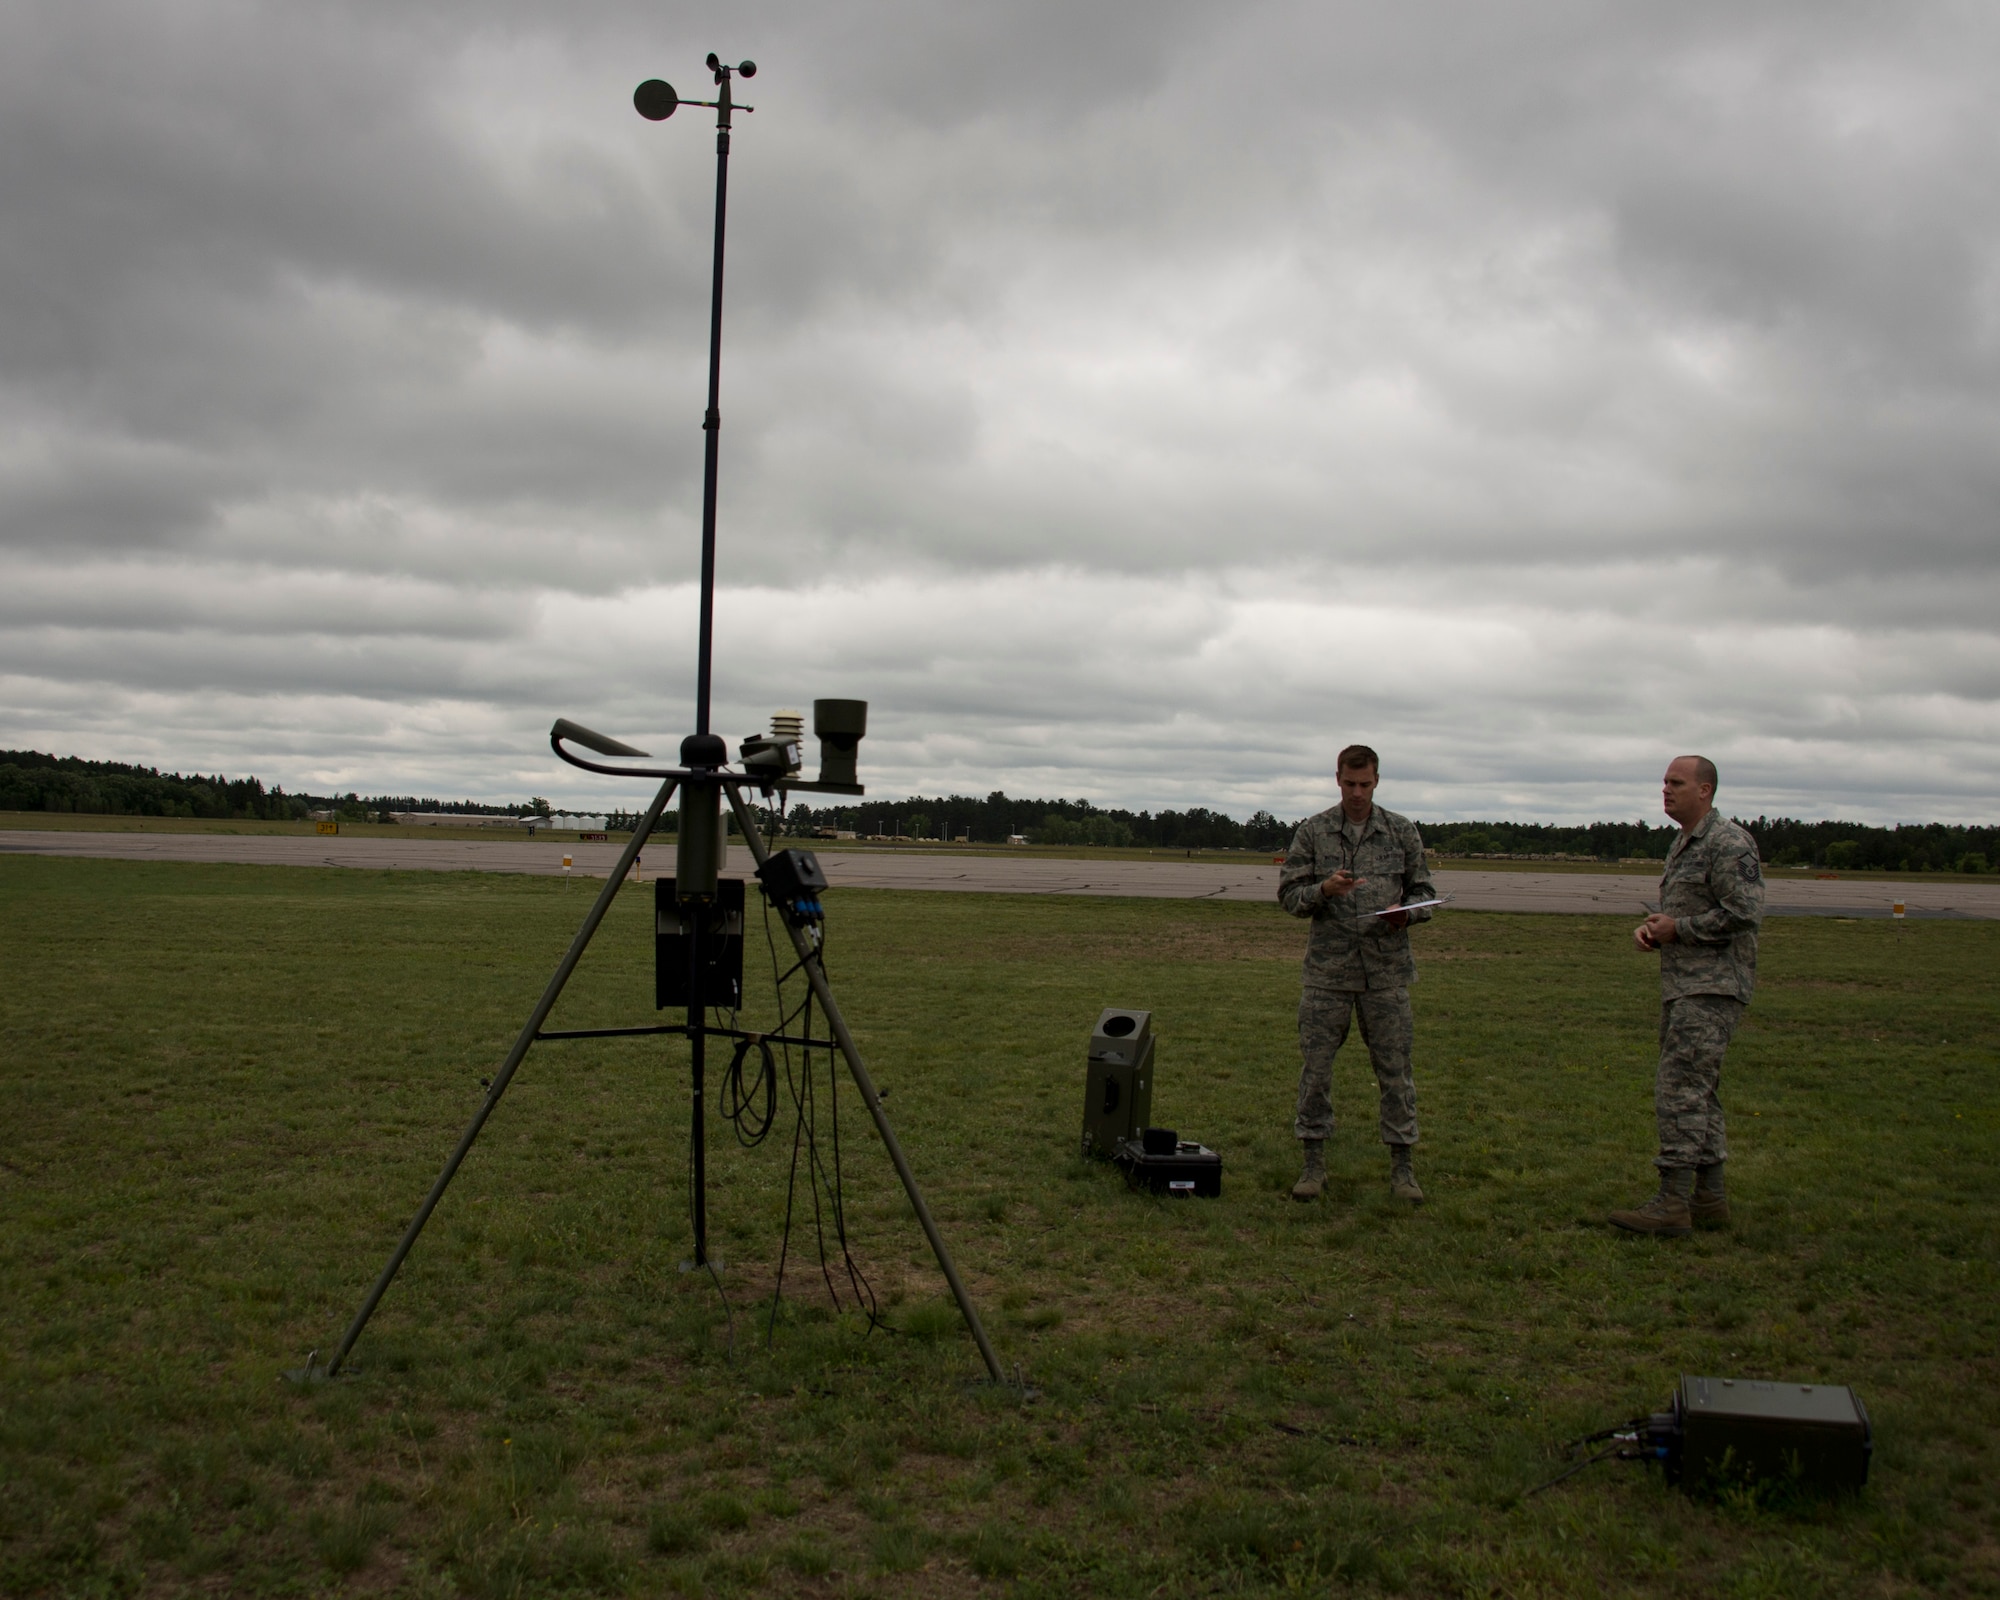 U.S. Air Force Master Sgt. James Emery, right, and Senior Airman Timothy Wigton, both from the 208th Weather Flight, collect weather information in Little Falls, Minn., June 12, 2014. Emery and Wigton participated in a training exercise with the Minnesota Army National Guard, Charlie Company, 834th Aviation Support Battalion where they provide up to date weather conditions for the pilots. 

(U.S. Air National Guard photo by Tech. Sgt. Amy M. Lovgren/Released)